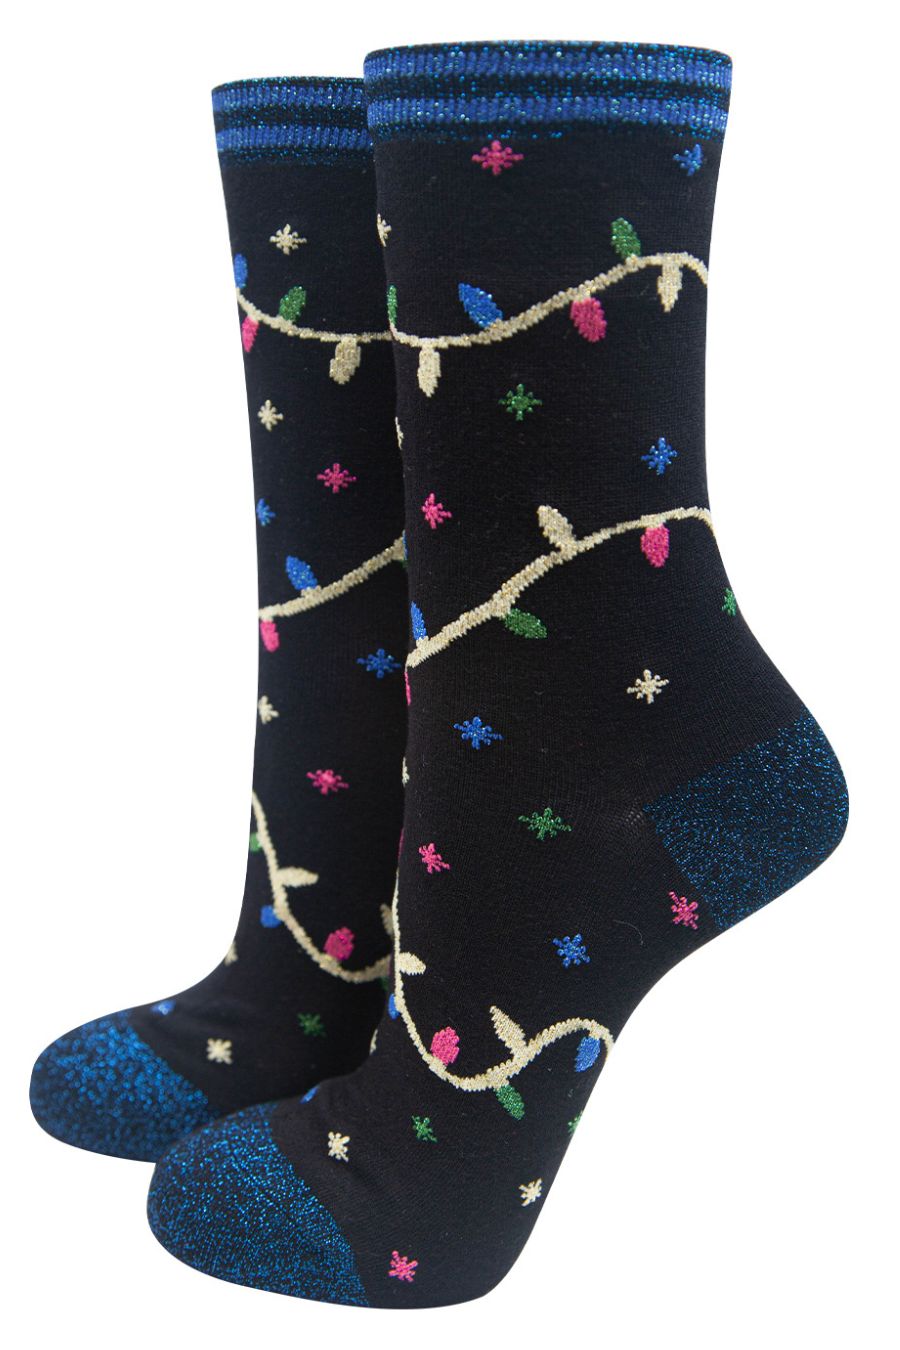 black and blue glitter ankle socks with a multicoloured fairy lights pattern